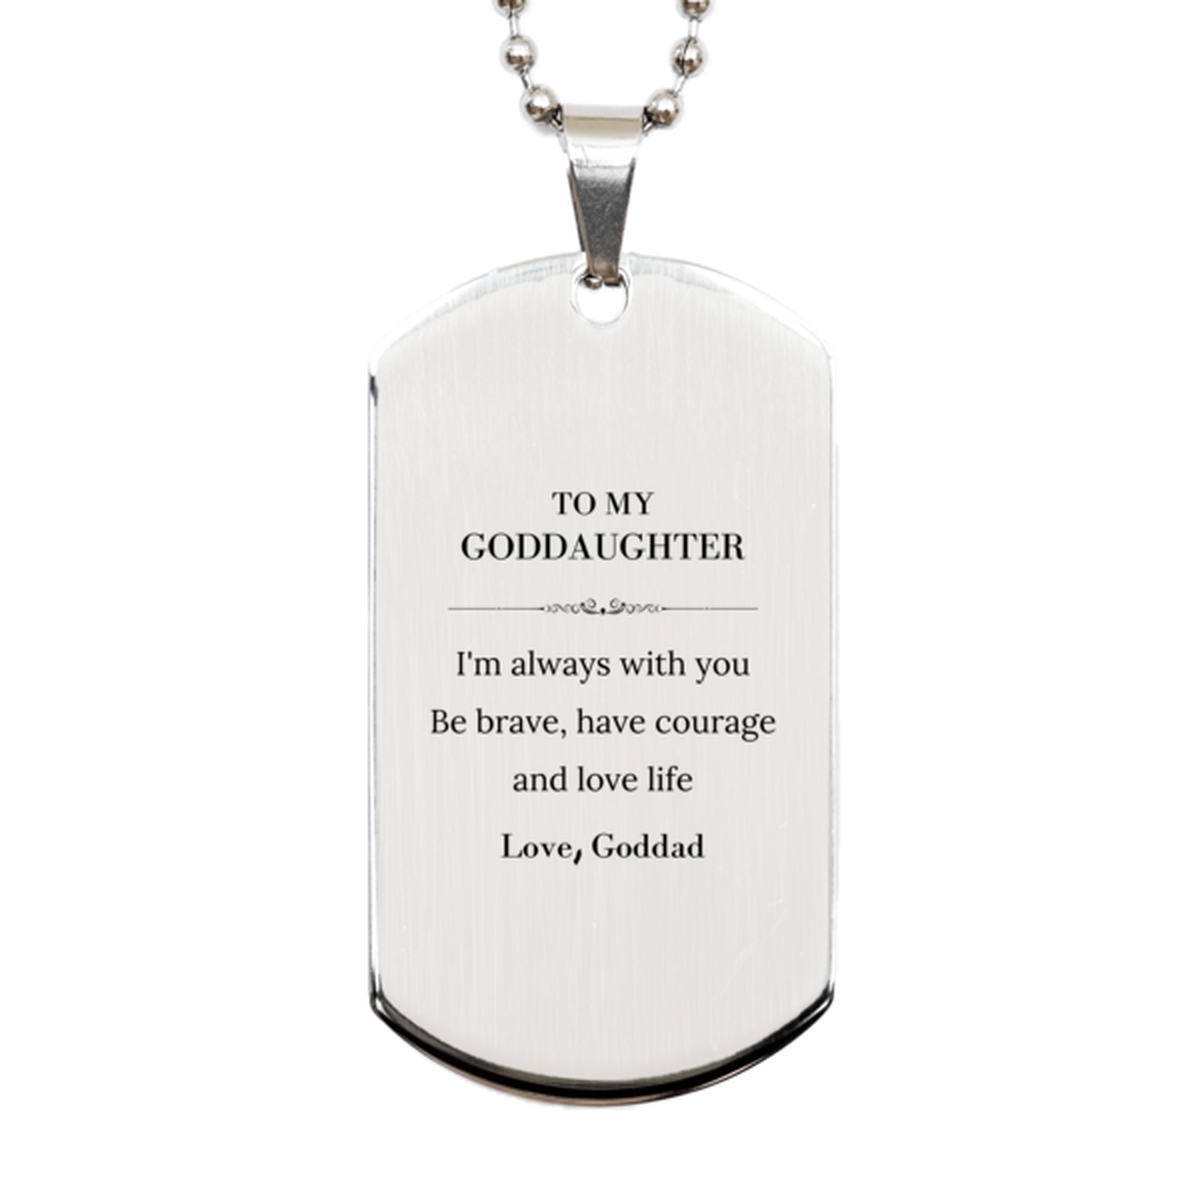 To My Goddaughter Gifts from Goddad, Unique Silver Dog Tag Inspirational Christmas Birthday Graduation Gifts for Goddaughter I'm always with you. Be brave, have courage and love life. Love, Goddad